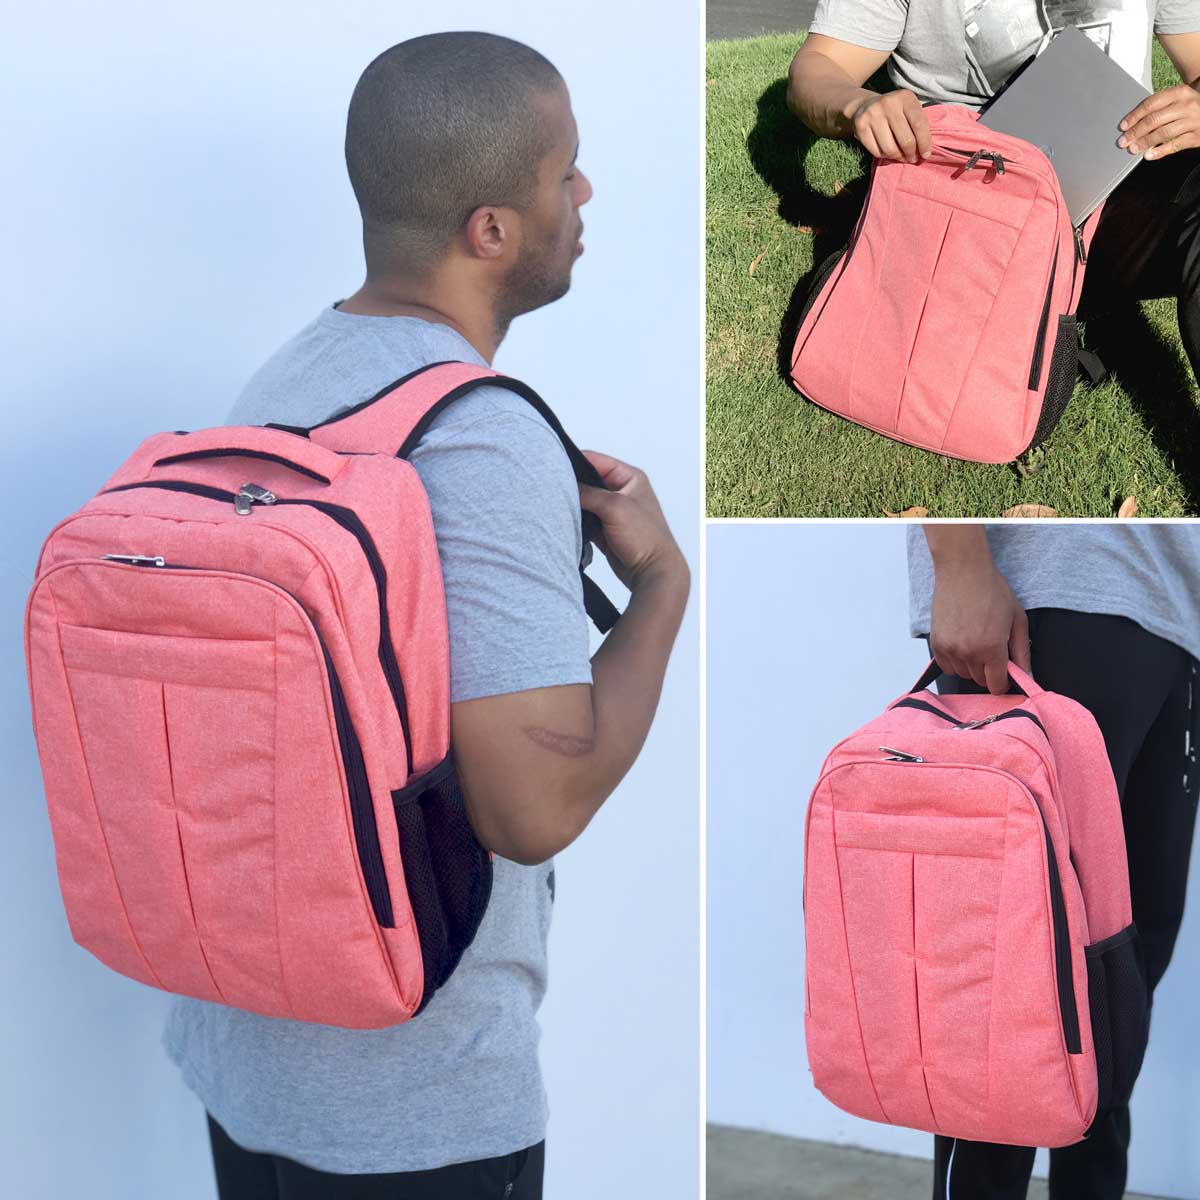 DALIX Signature Travel or Gym Duffle Bag in Pink